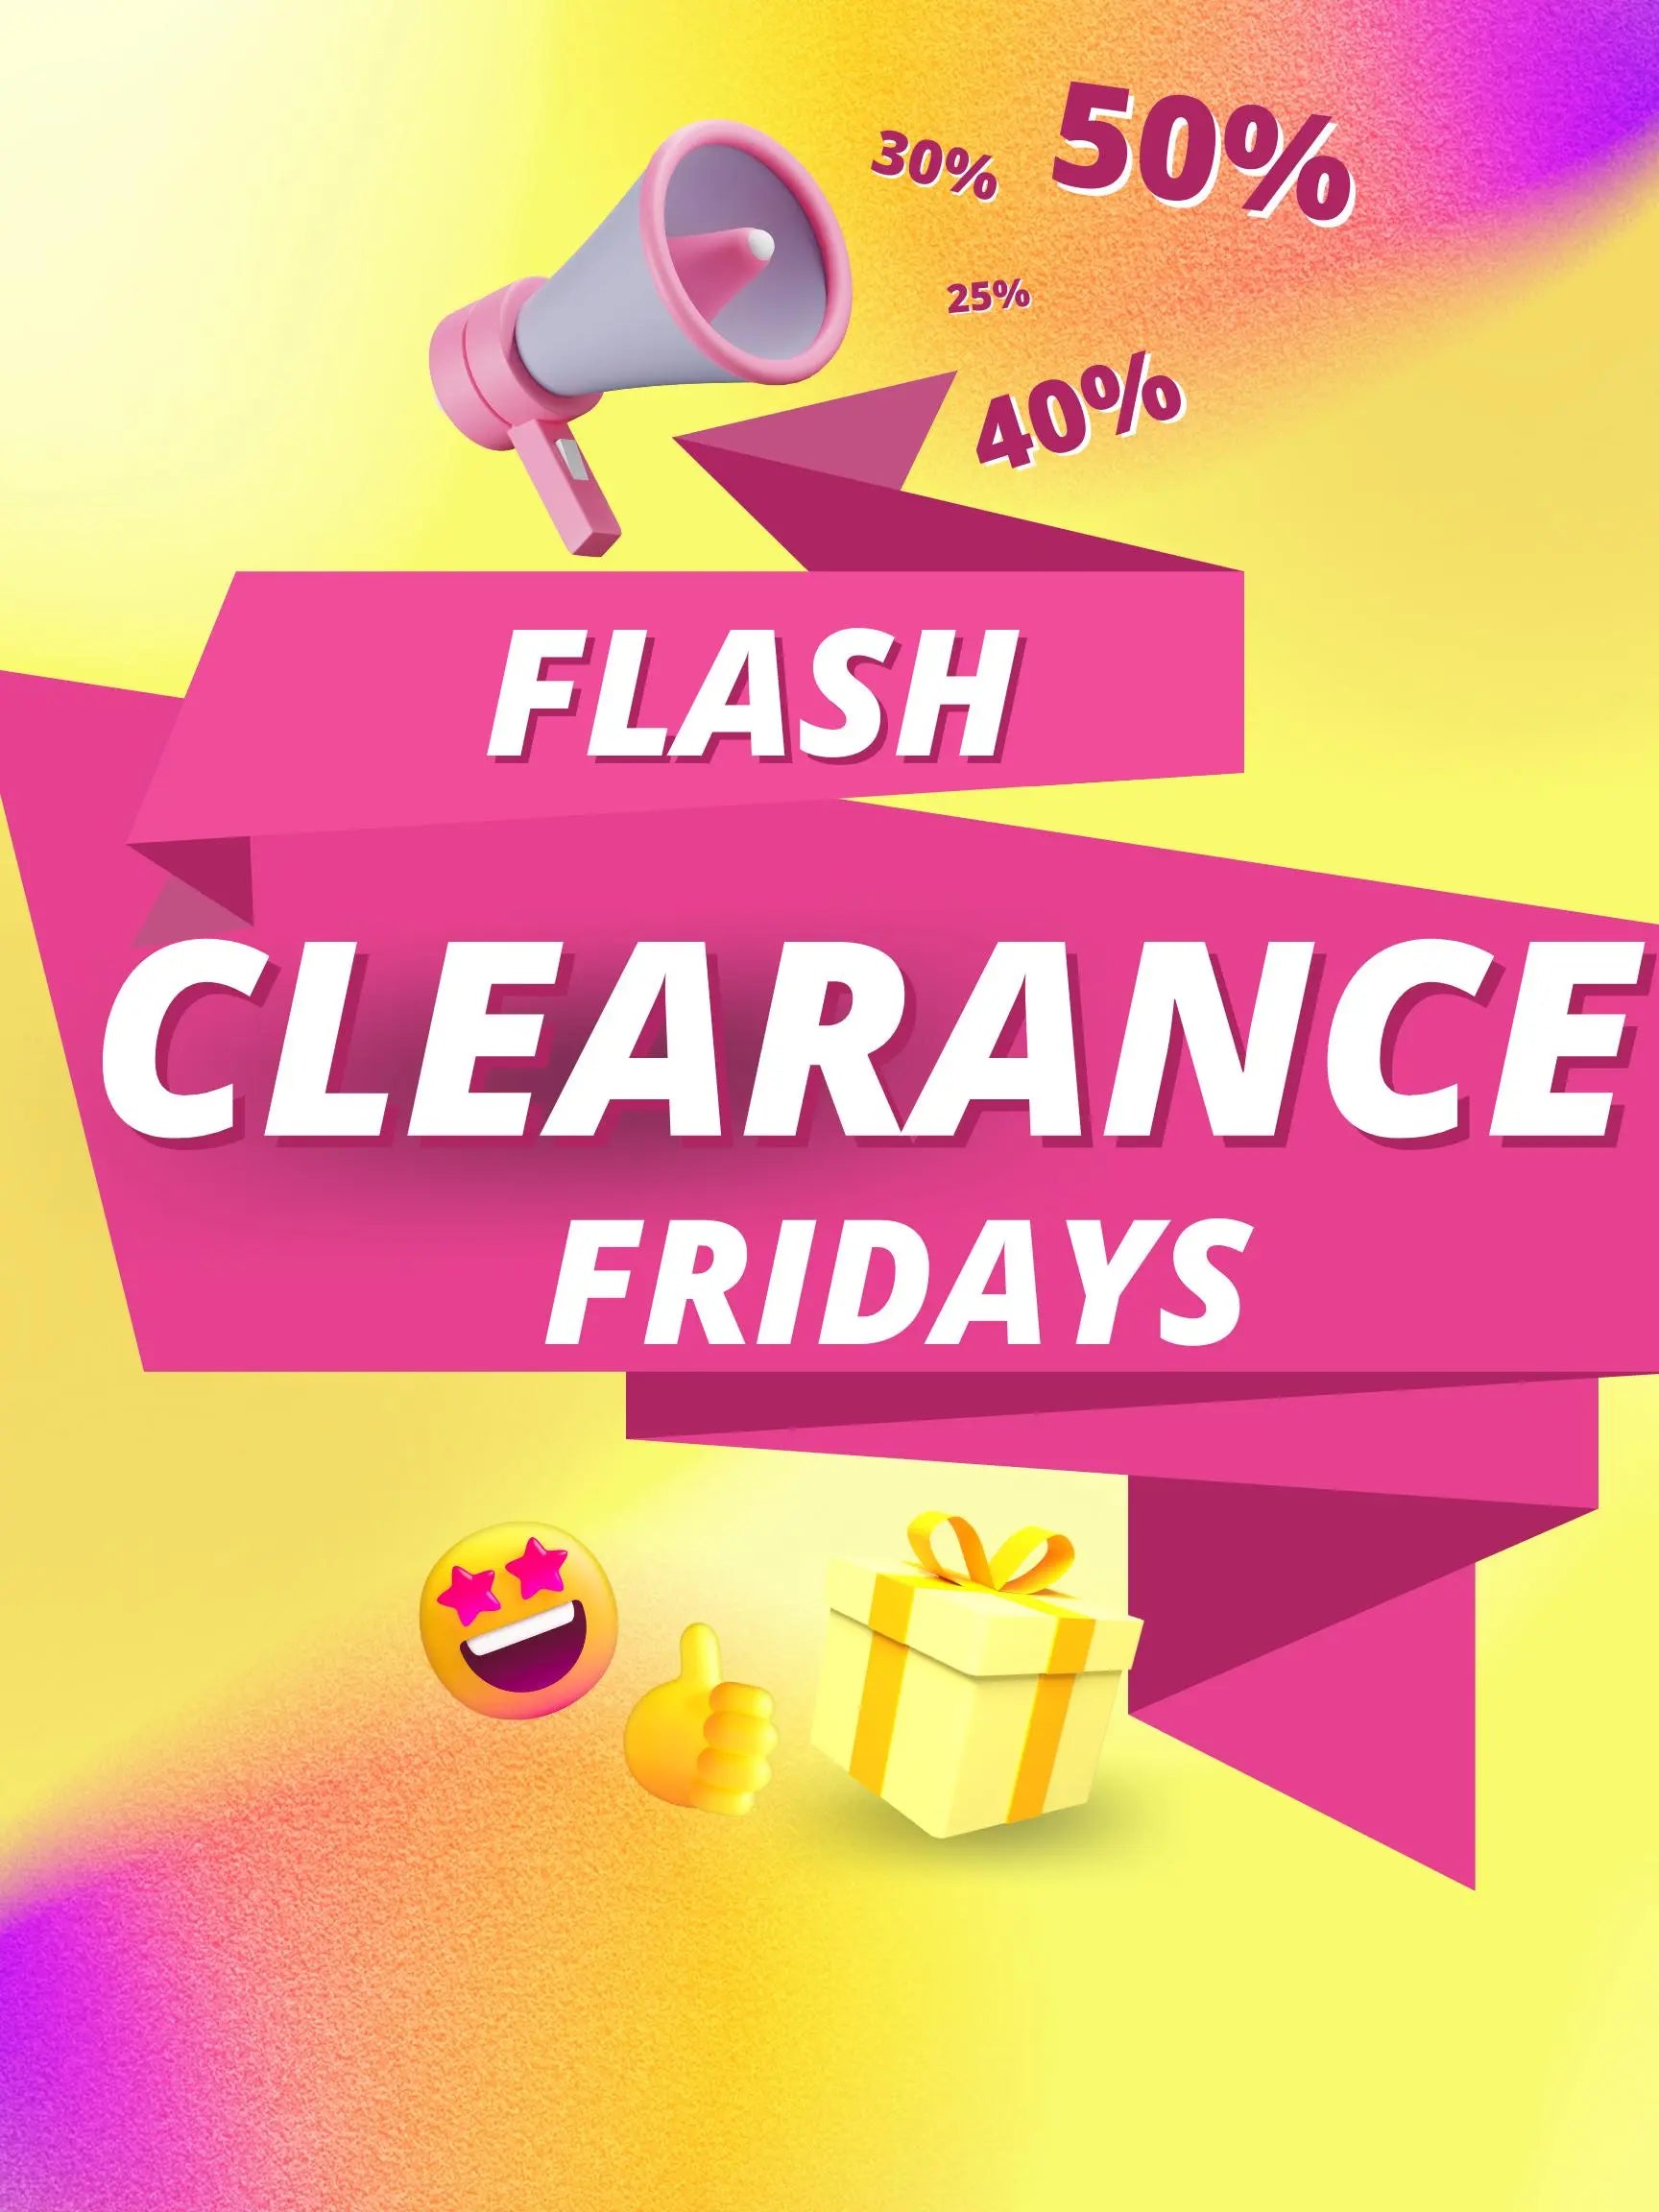 Save Big on Clearance Clothing: Shop Discounted Styles Today! |⚡Flash Clearance Fridays⚡